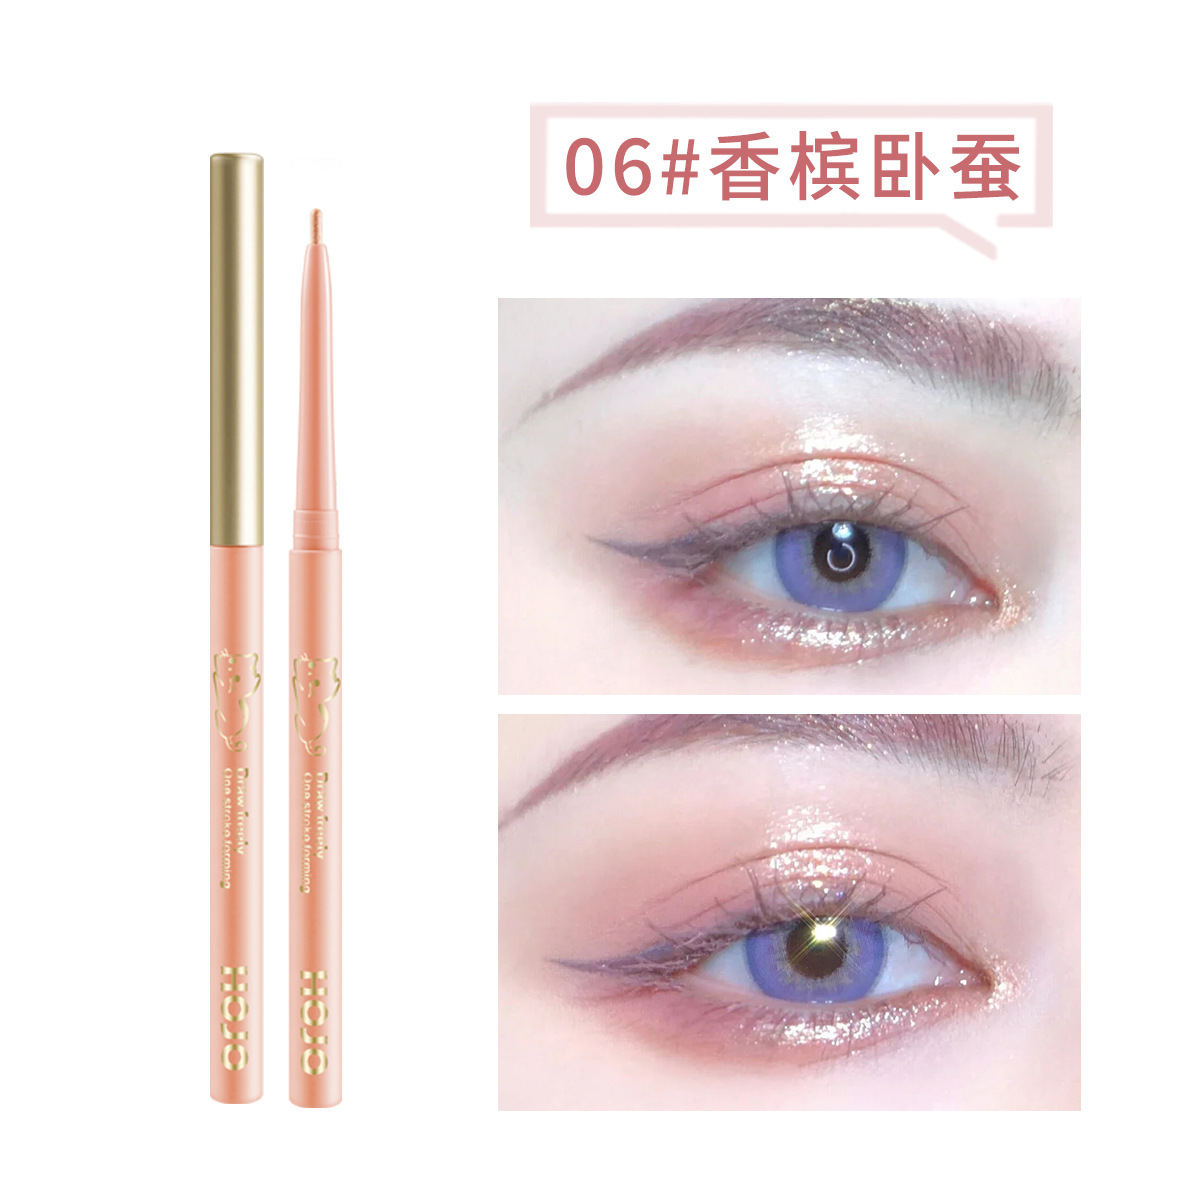 Hojo Smooth Makeup Eyeliner Coloring Naturally Waterproof Not Easy to Smudge Highlight Eye Shadow Pen New for Beginners